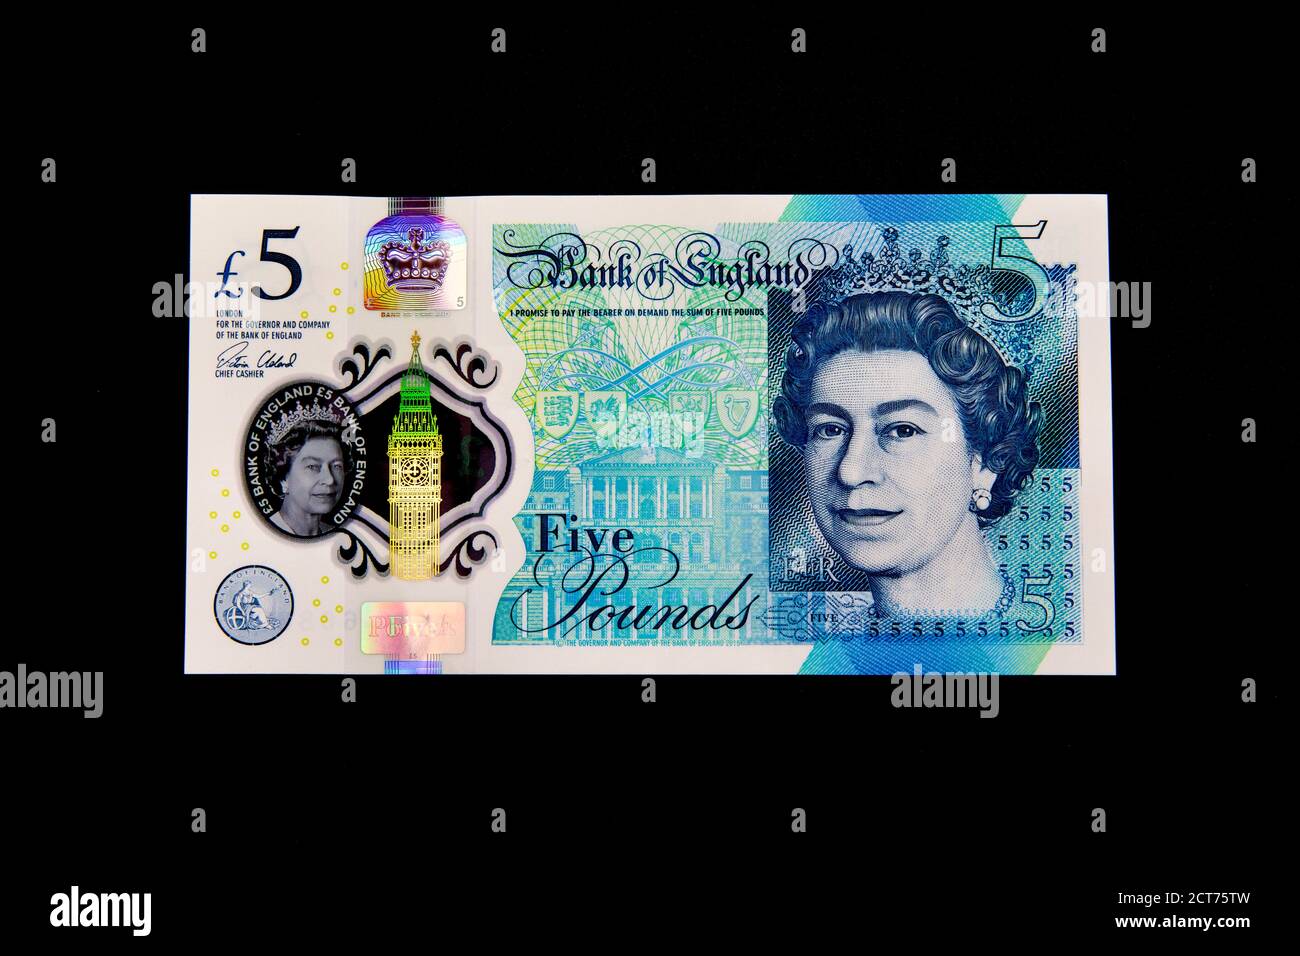 The new £5 polymer banknote featuring Sir Winston Churchill on a black background Stock Photo